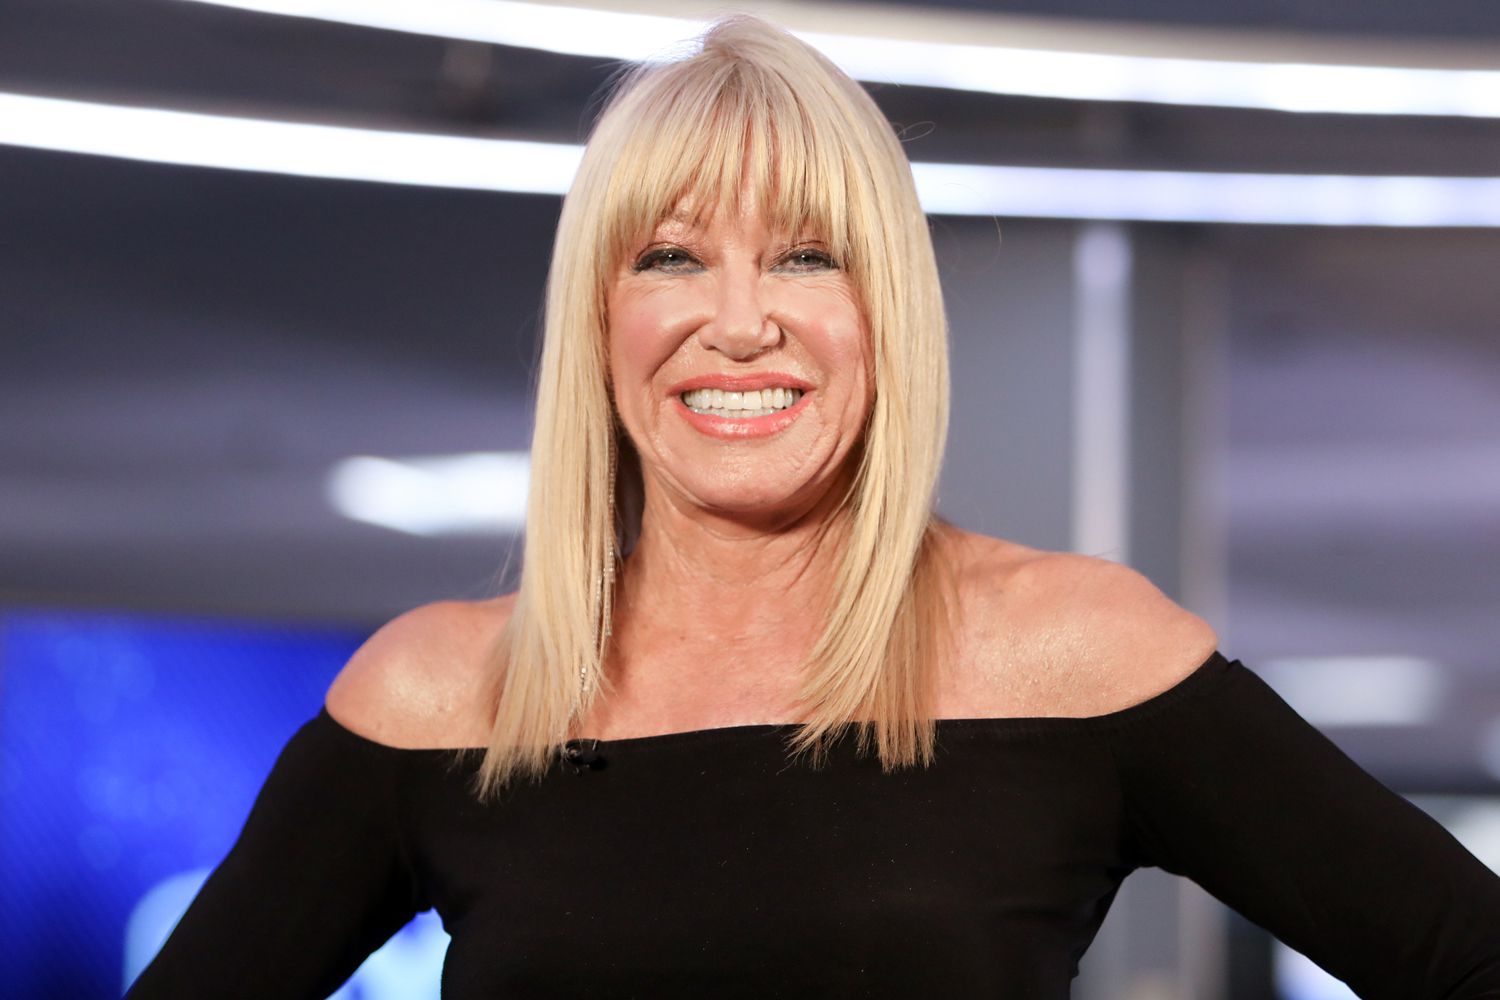 Ralph Remembers The Life Of ‘Three’s Company’ Star Suzanne Somers